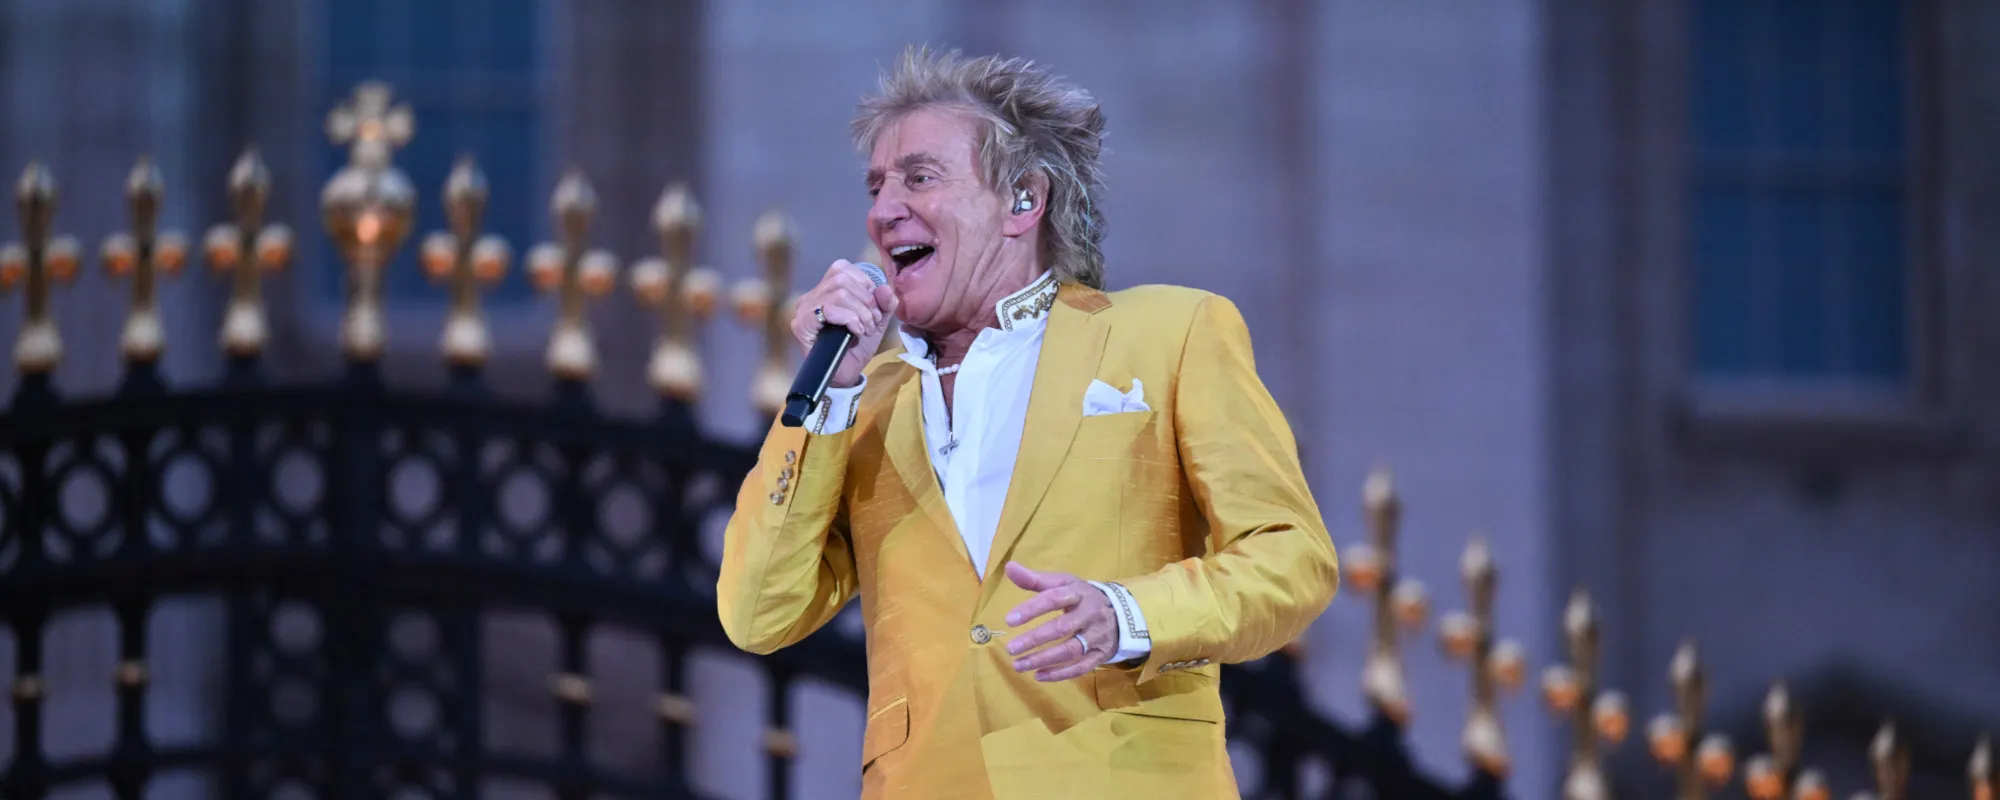 Watch: Rod Stewart Performs “Baby Jane” and “Sweet Caroline” at Queen’s Jubilee